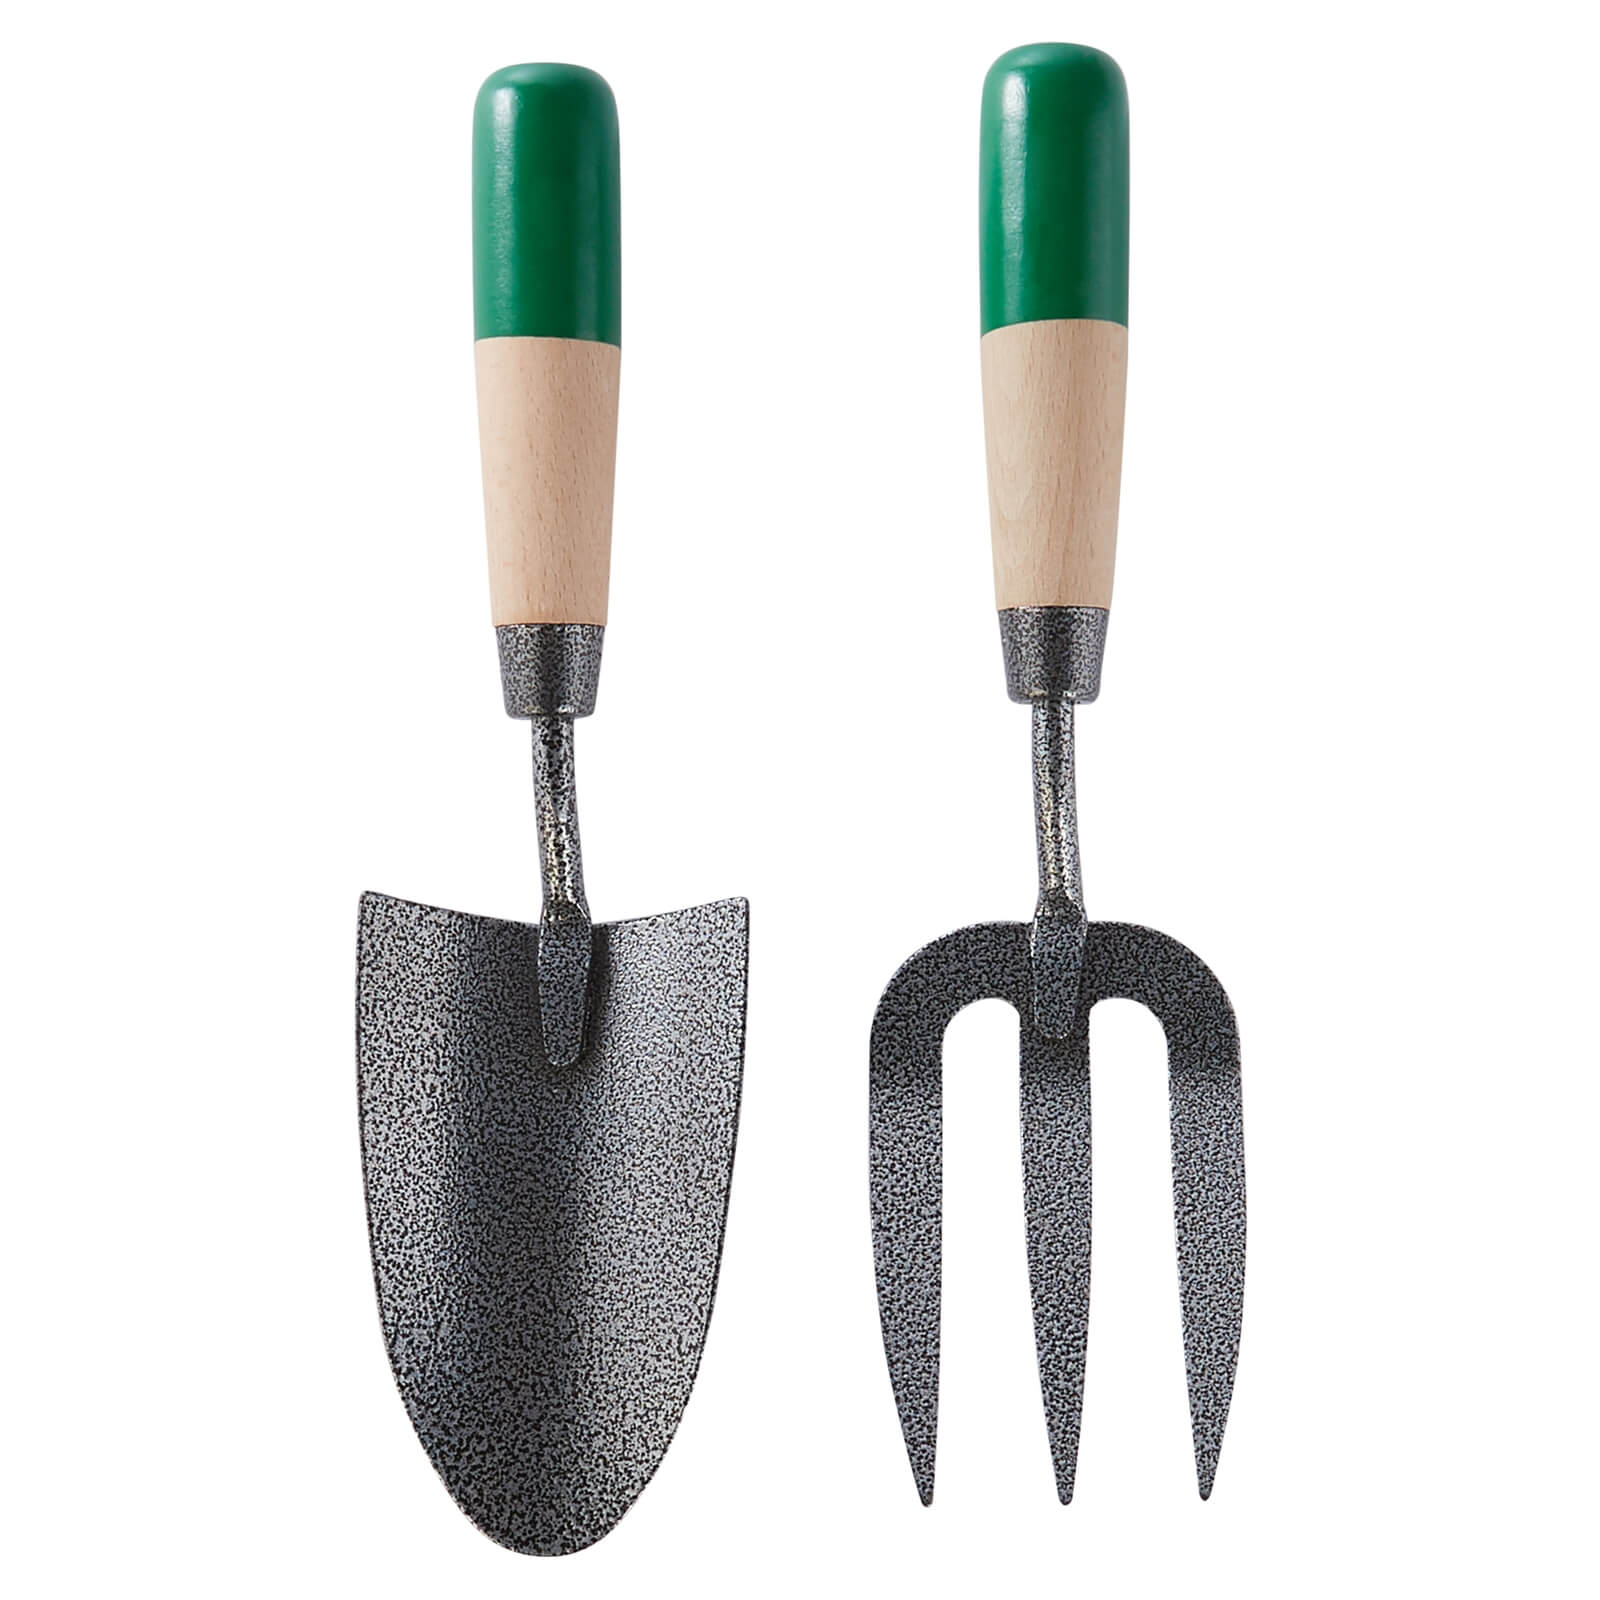 Qualcast Trowel And Fork